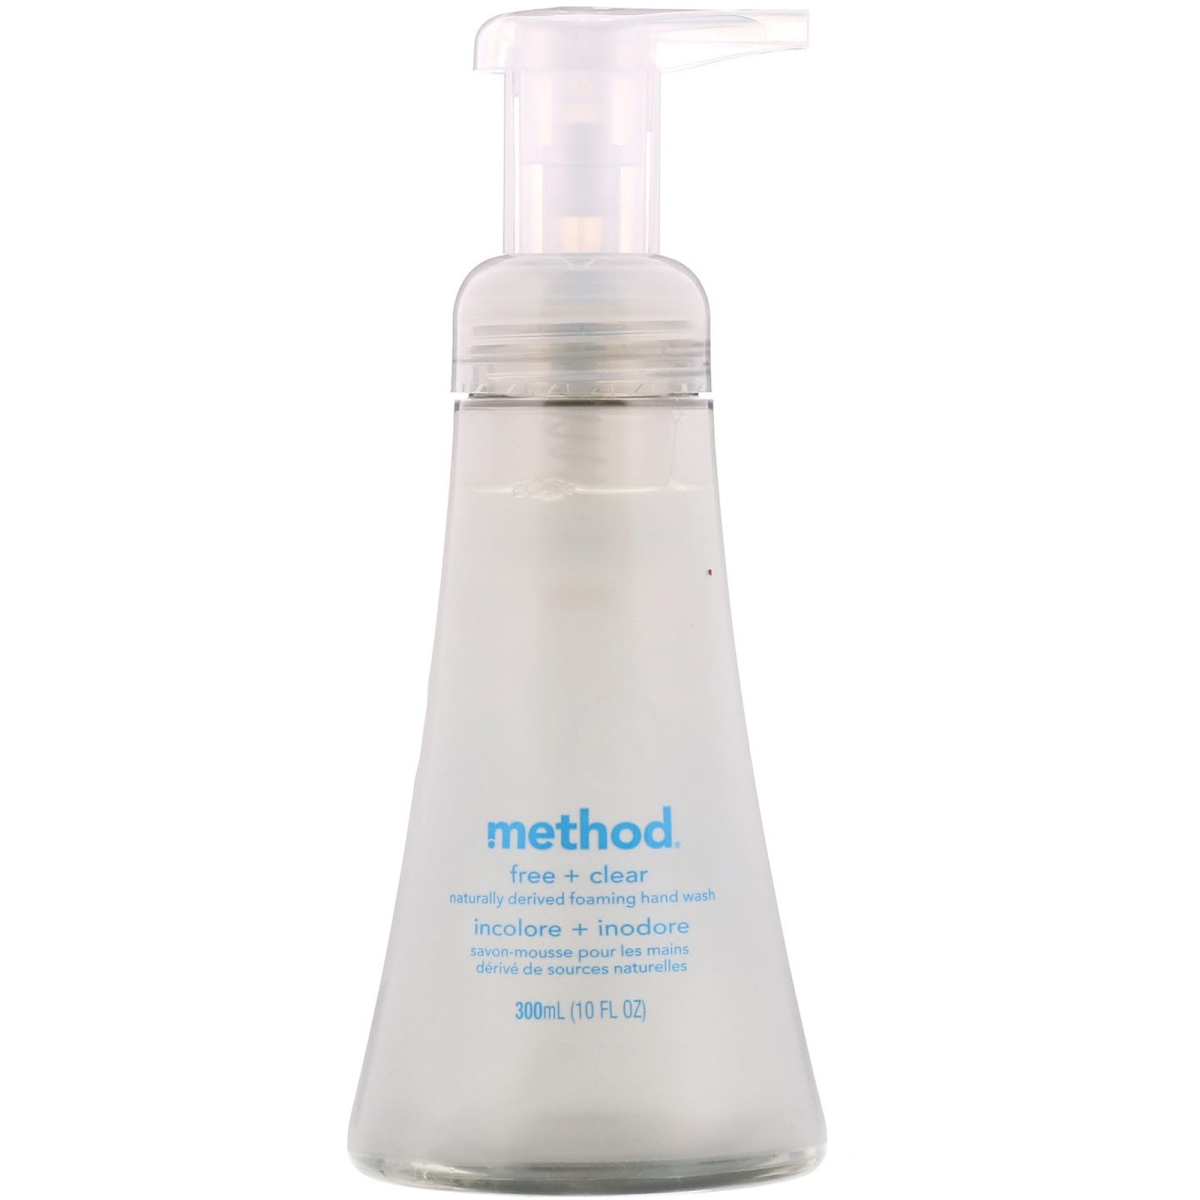 Method Products Mth01977ea 10 Fl Oz Naturally Derived Foaming Hand Wash, Free & Clear